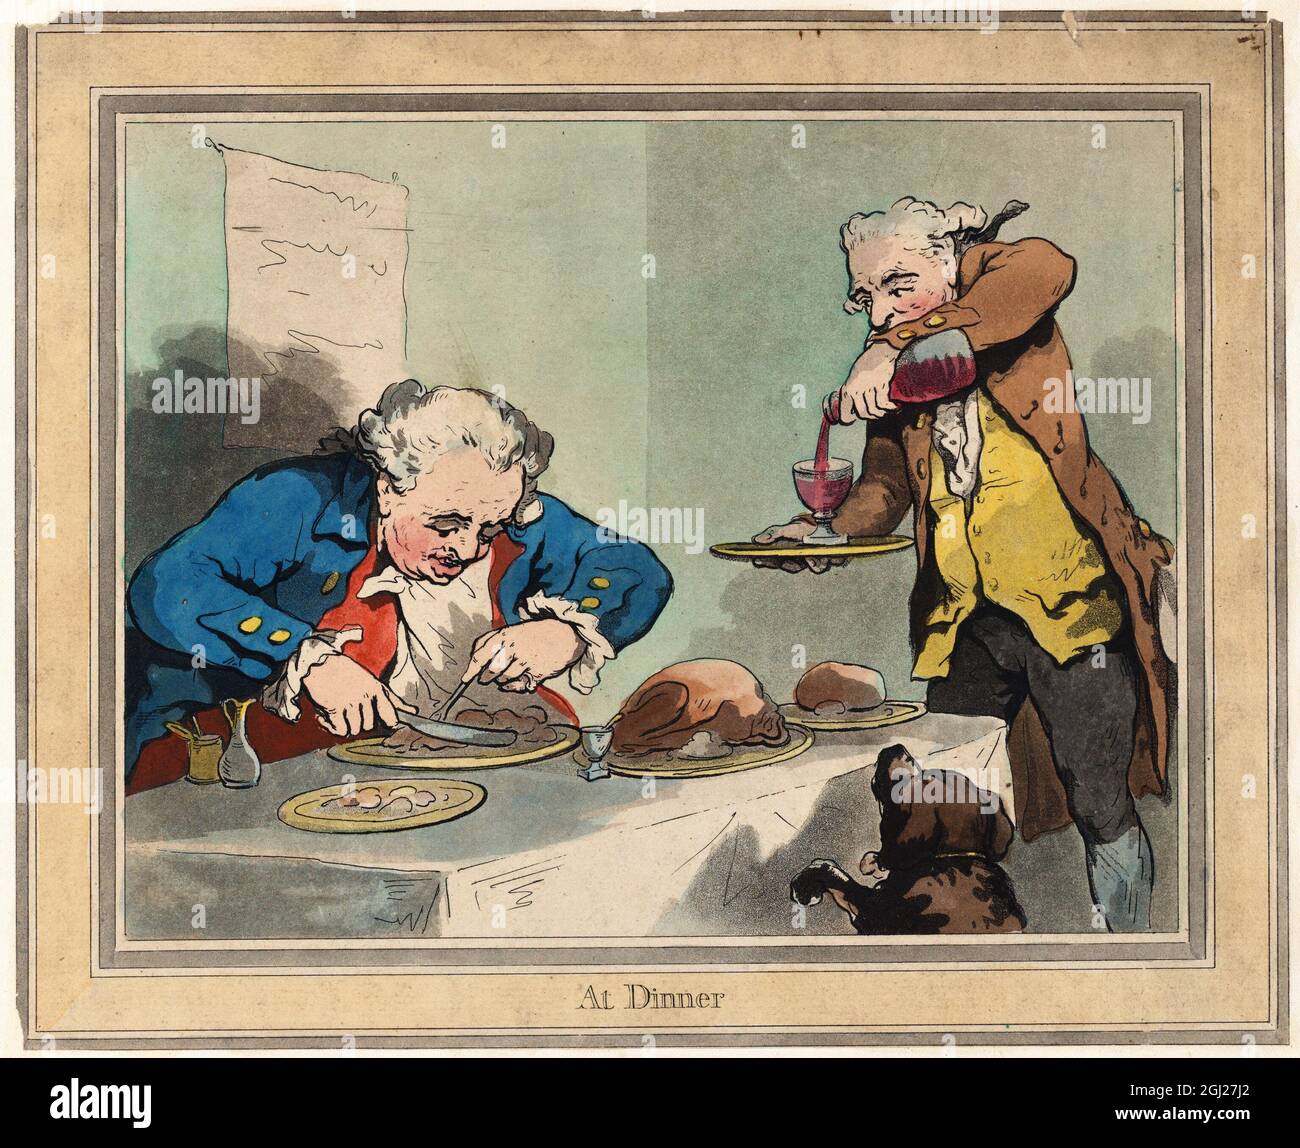 At Dinner 1792 Artist: Thomas Rowlandson (1756-1827) an English artist and caricaturist of the Georgian Era. A social observer, he was a prolific artist and print maker.  Credit: Thomas Rowlandson/Alamy Stock Photo